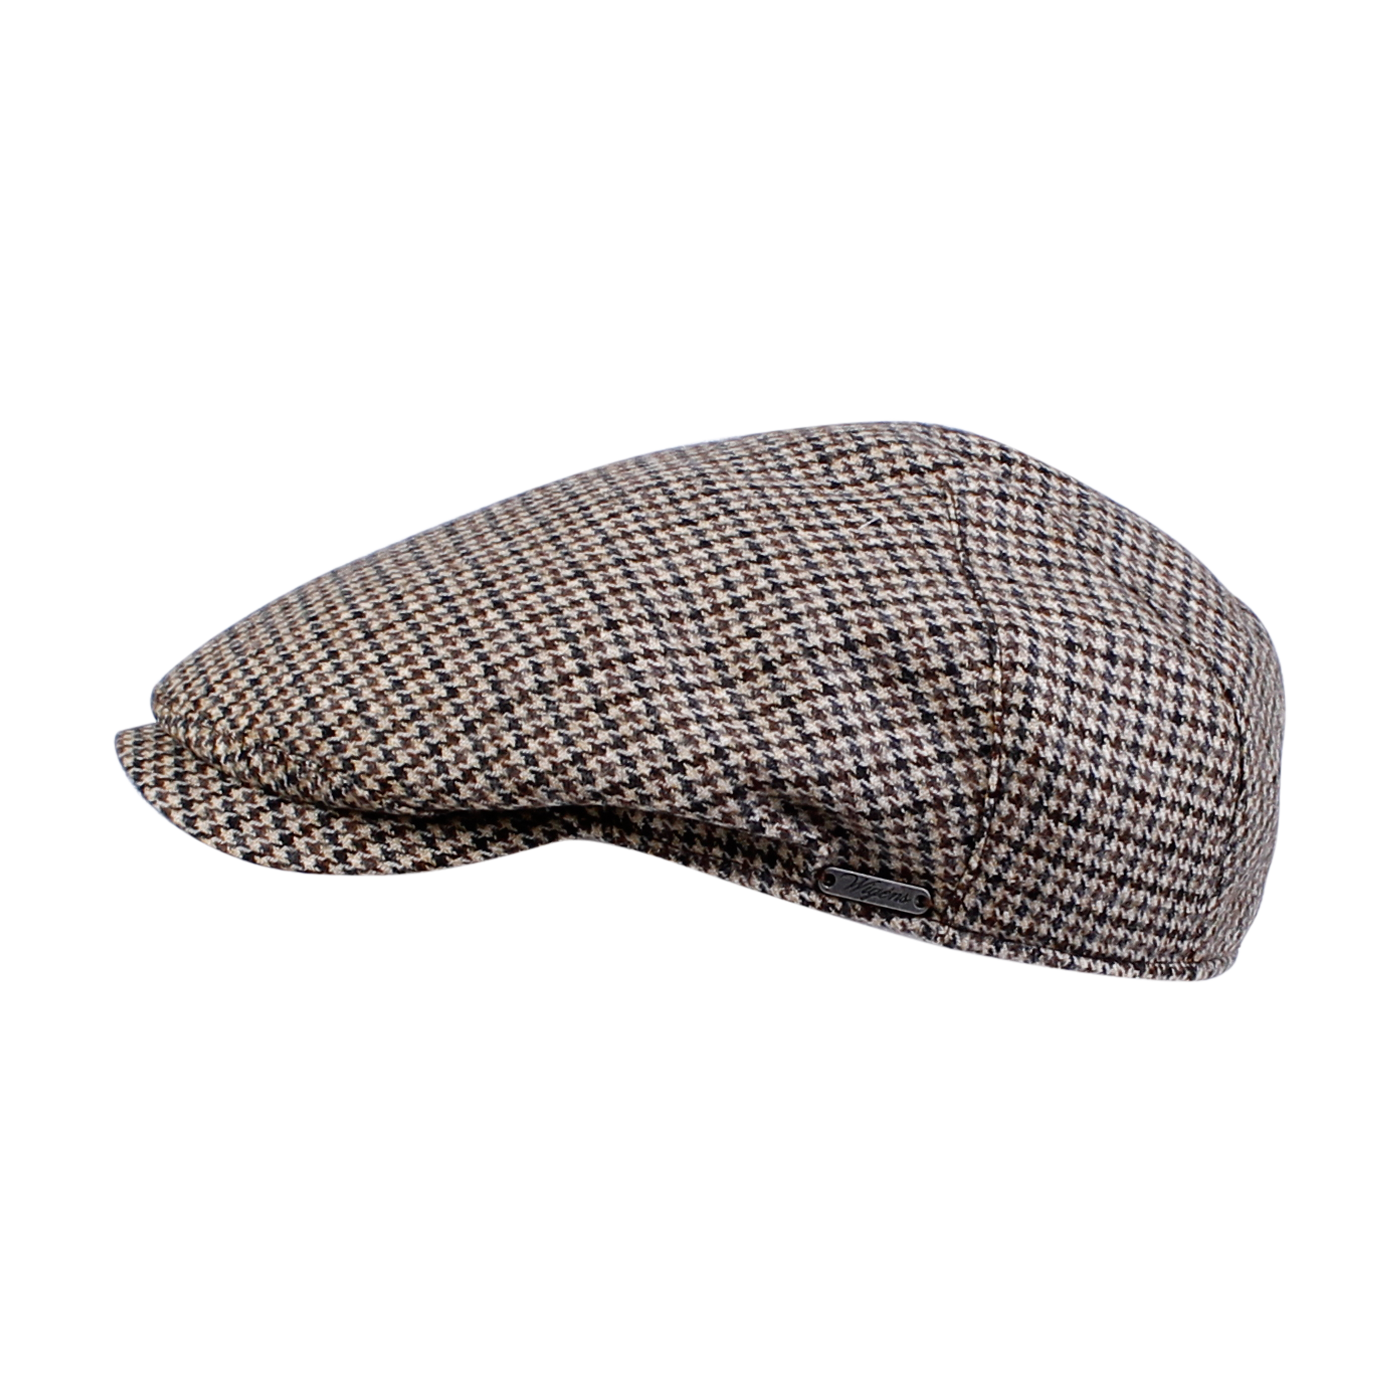 Ivy One Piece Wool Cap in Dark Camel Small Dogtooth Check (Size 56) by Wigens